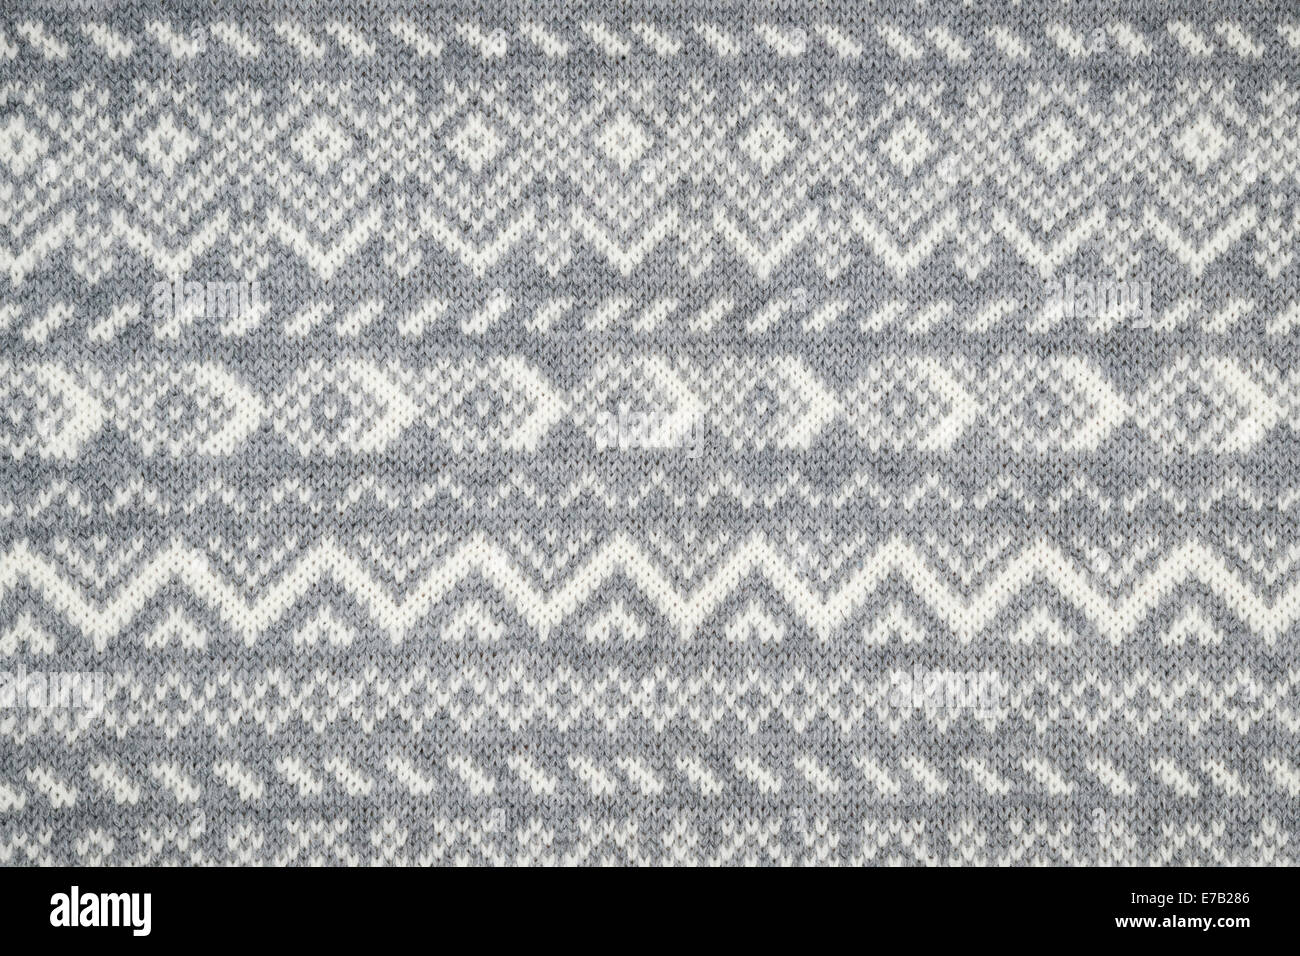 Knit fabric background with knitted grey and white geometric pattern Stock Photo